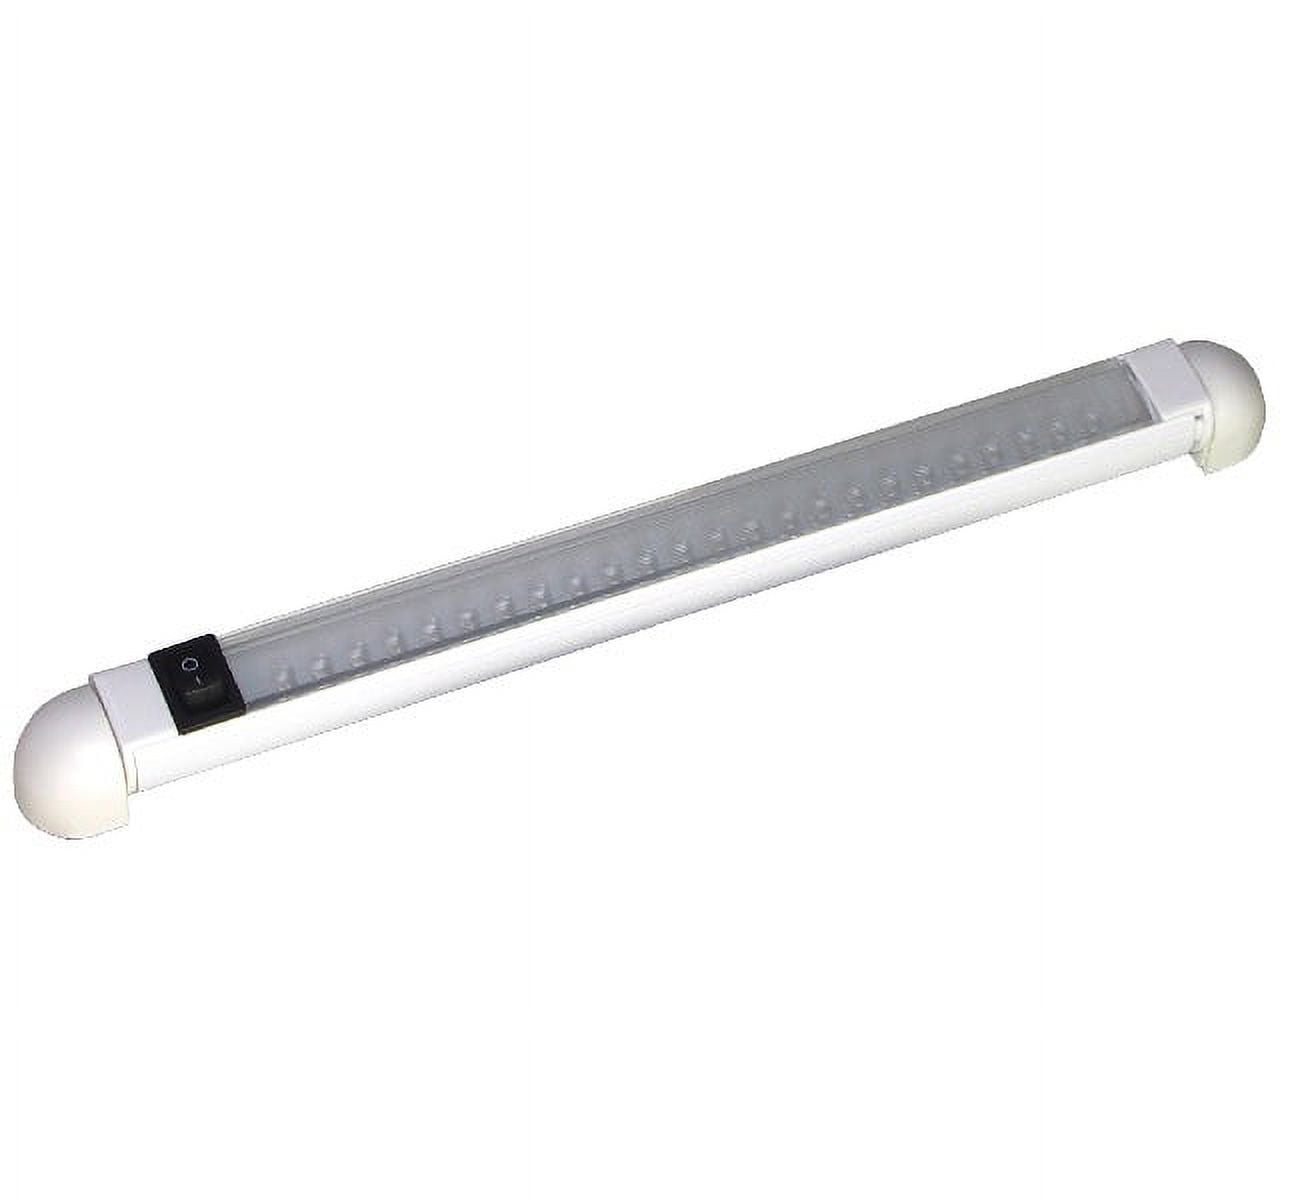 12 12 Volt LED Tube Light Replacement from M4